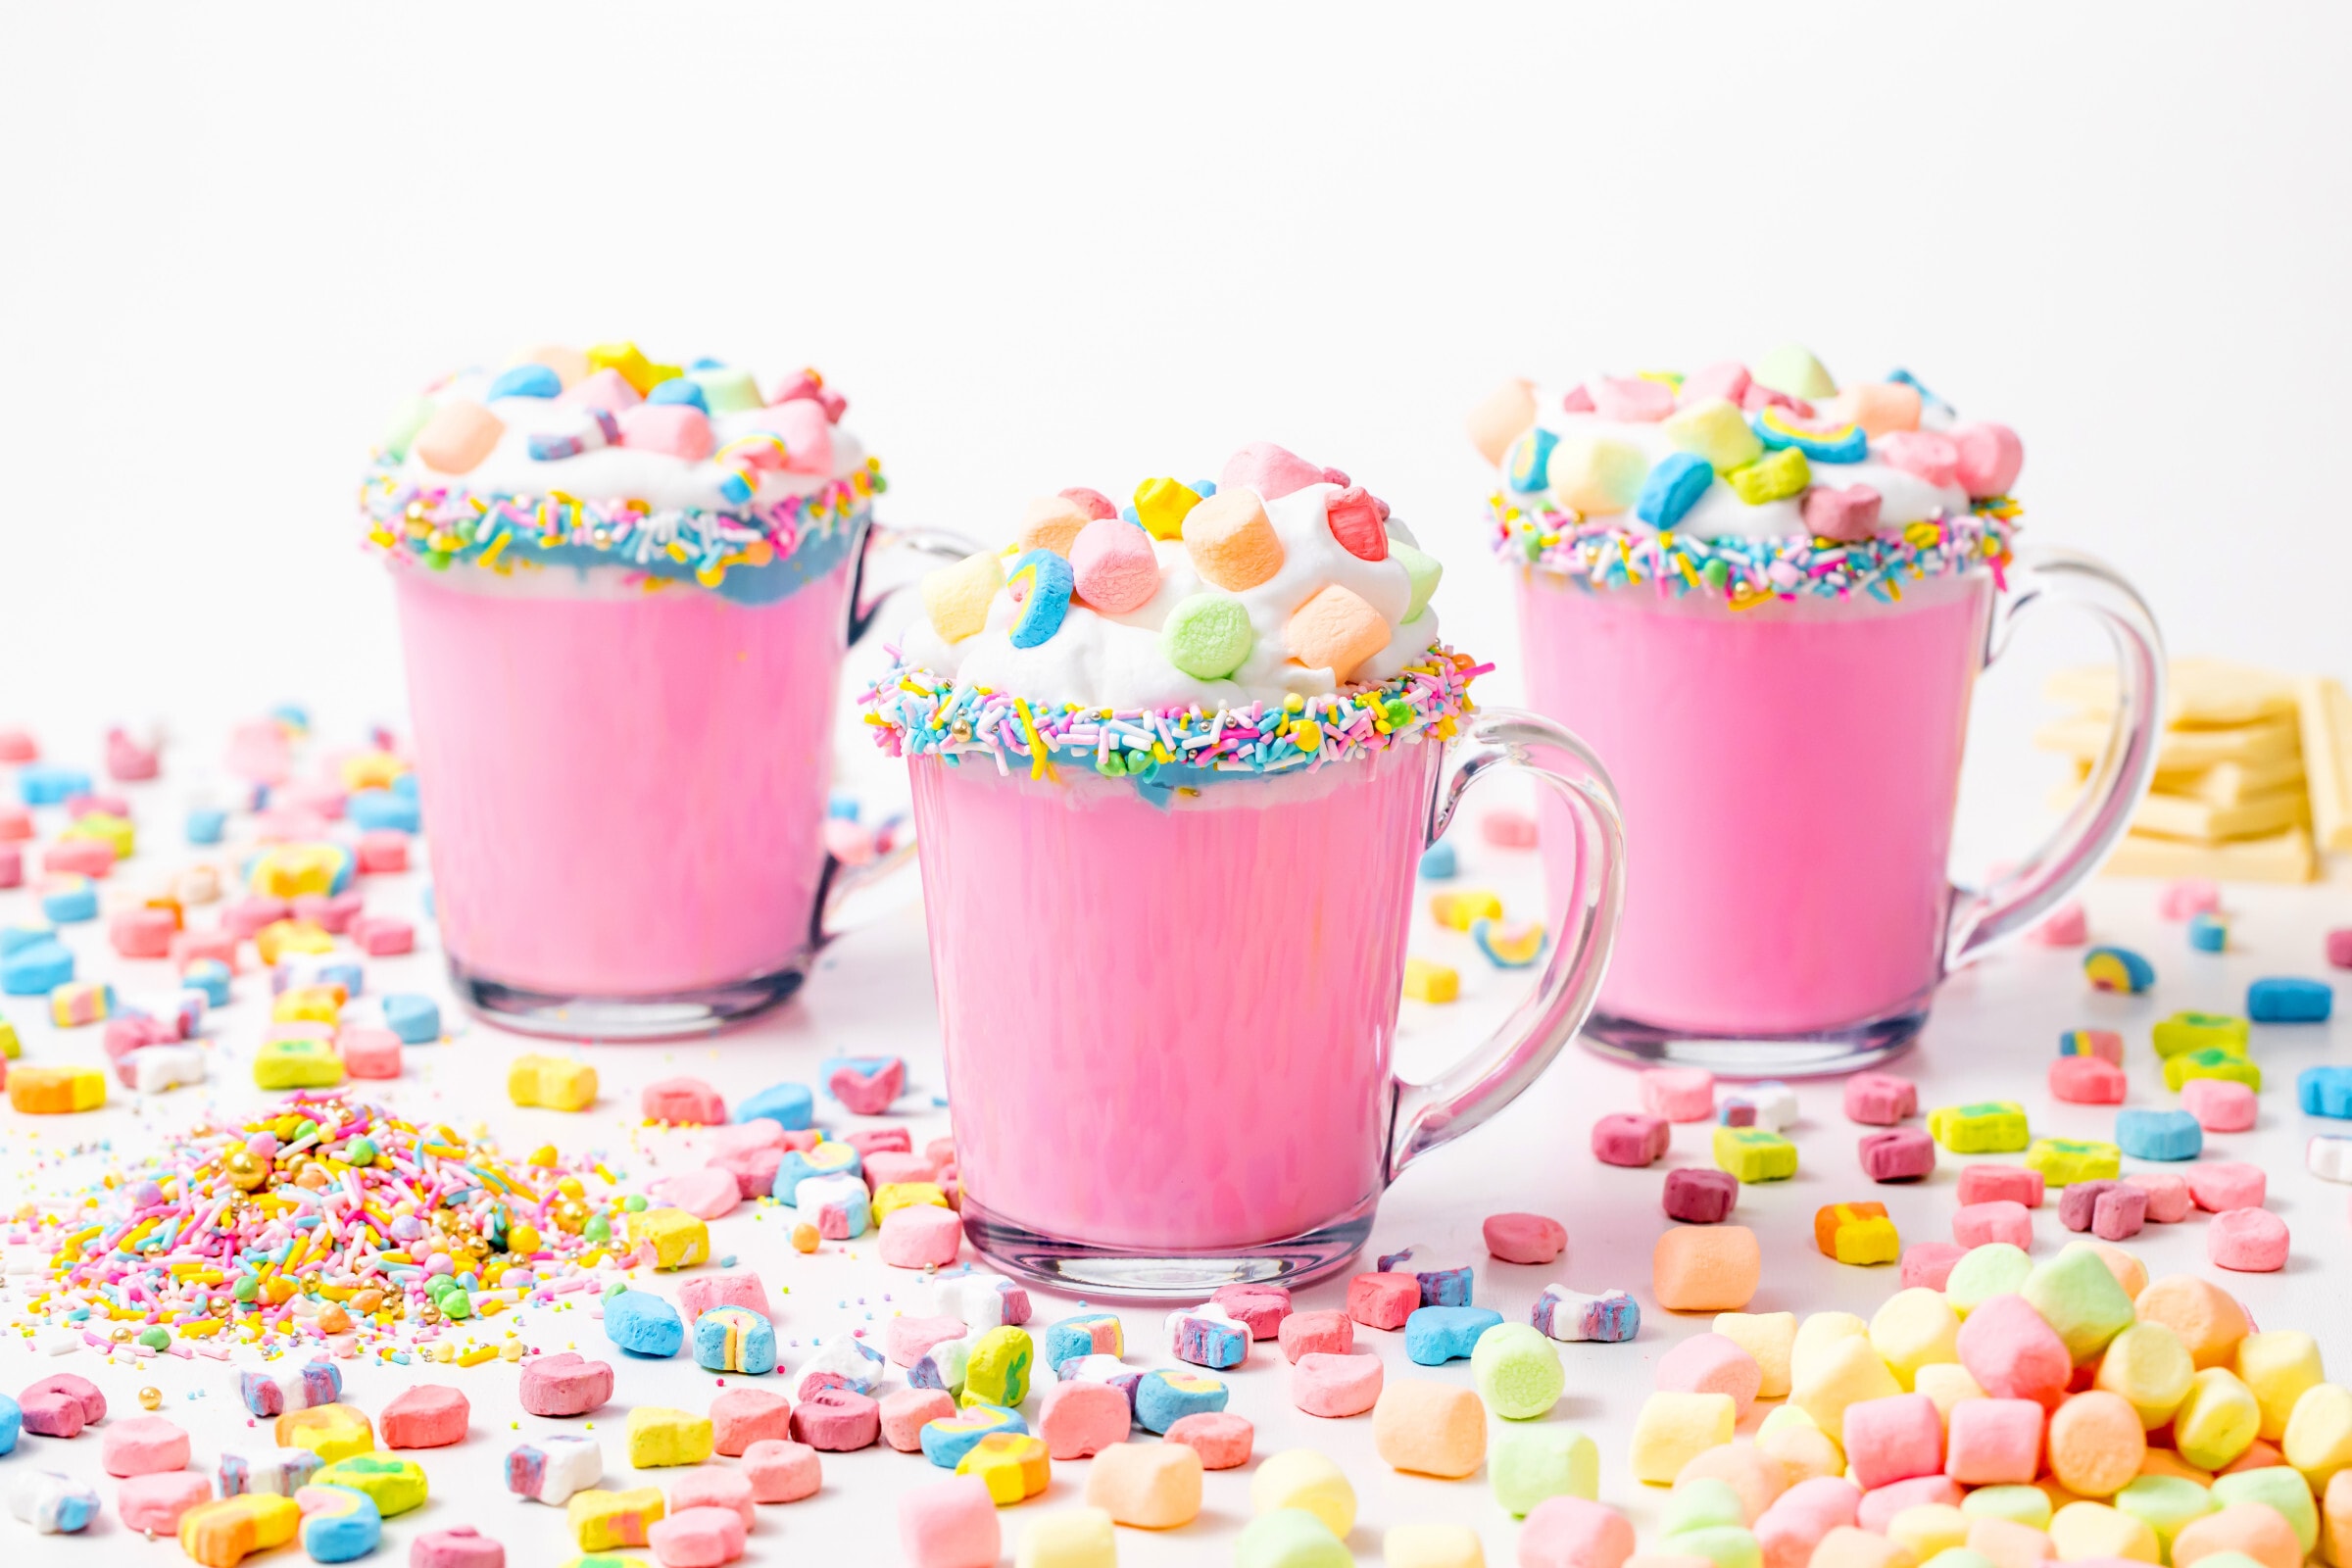 https://www.makeitgrateful.com/wp-content/uploads/2018/09/5D4B3097-Unicorn-Hot-Chocolate-pink-hot-chocolate-with-whipping-cream-lucky-charms-marshmellows-on-a-white-table.jpg